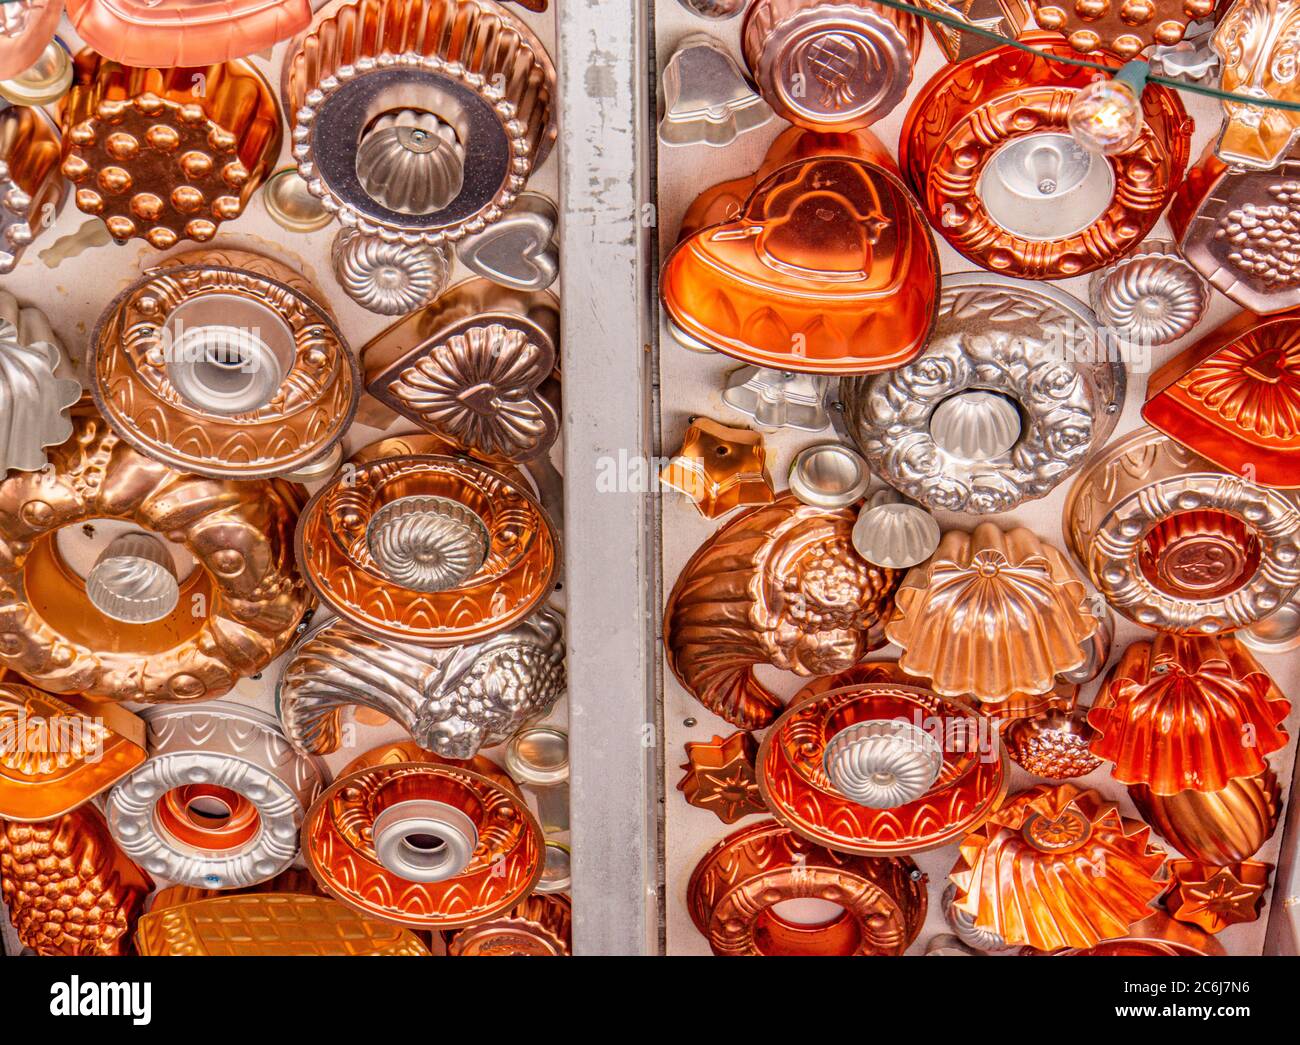 https://c8.alamy.com/comp/2C6J7N6/fun-dcor-ceiling-covered-with-old-copper-colored-metal-jello-salad-molds-for-decoration-and-light-fixtures-2C6J7N6.jpg